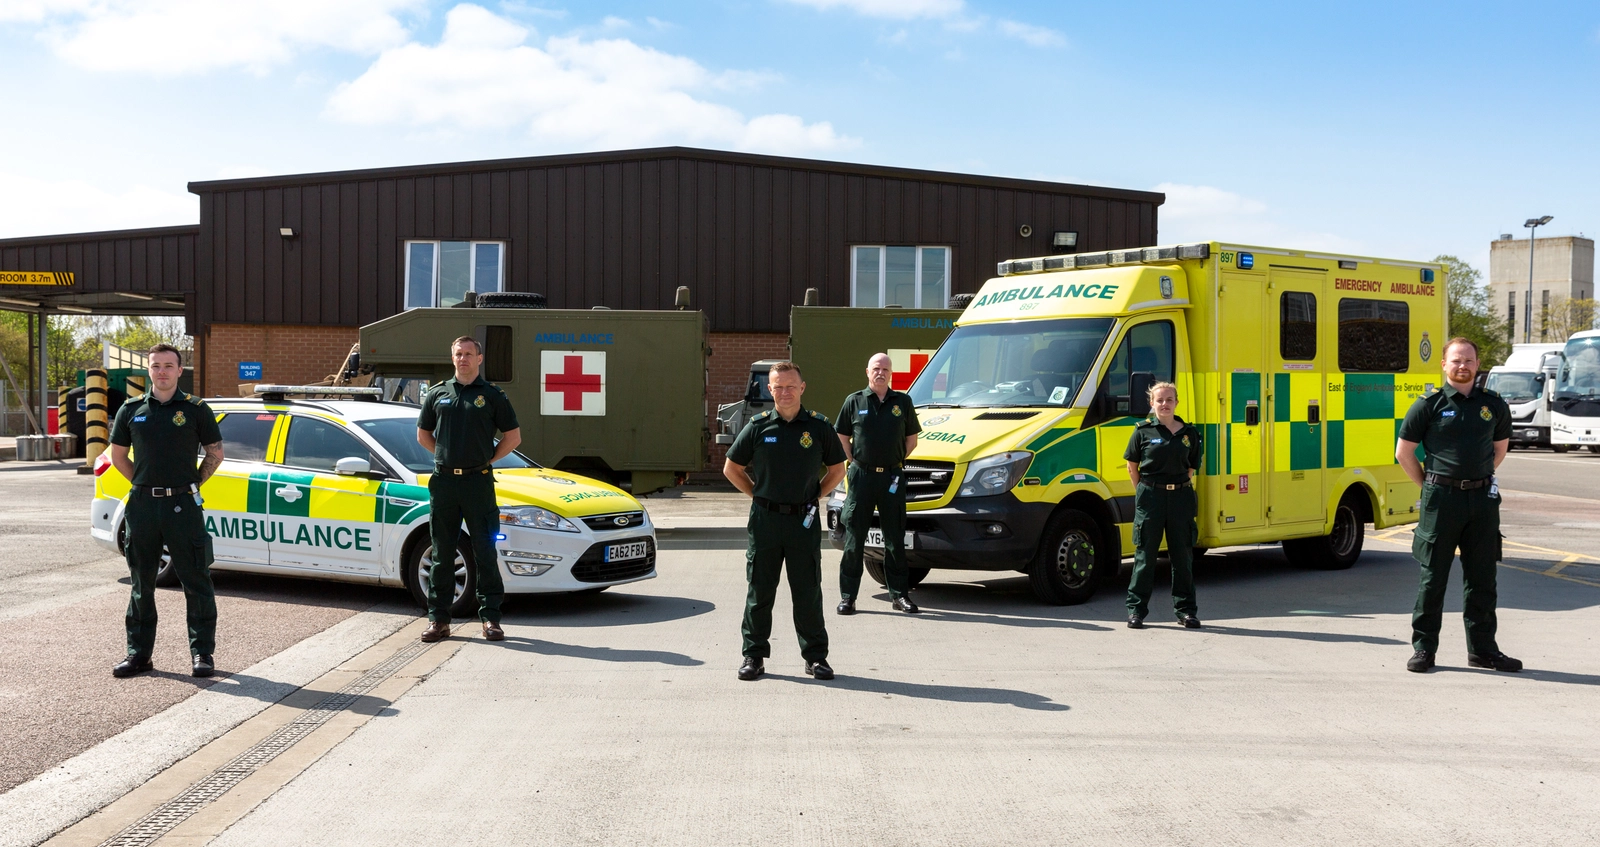 Karl Phillips and colleagues from the Ambulance Service